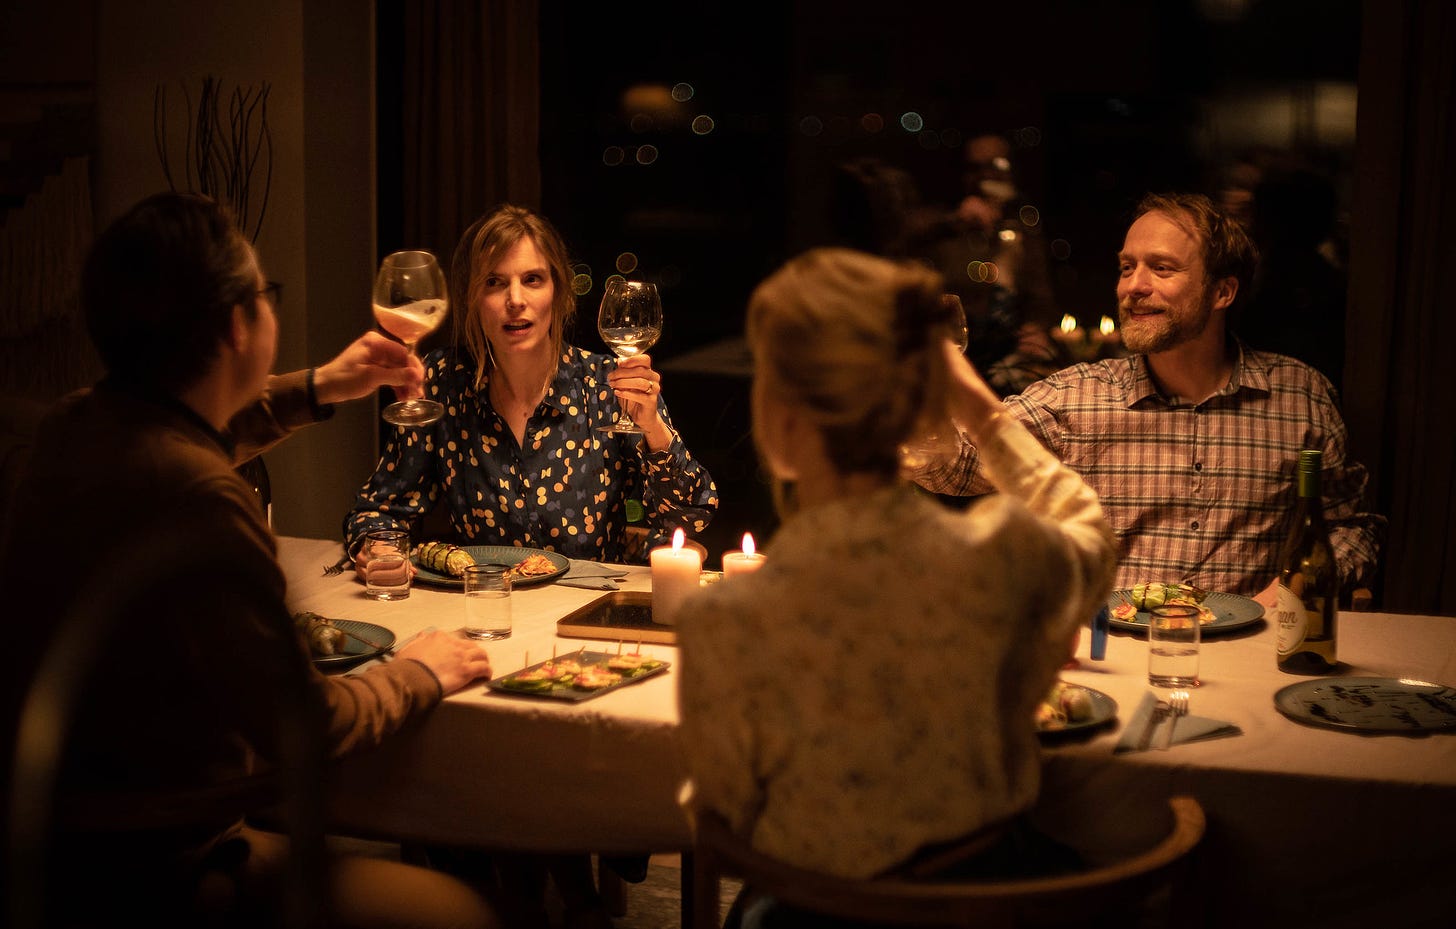 A group of four people at dinner raising their wine glasses in a toast, a still from Speak No Evil